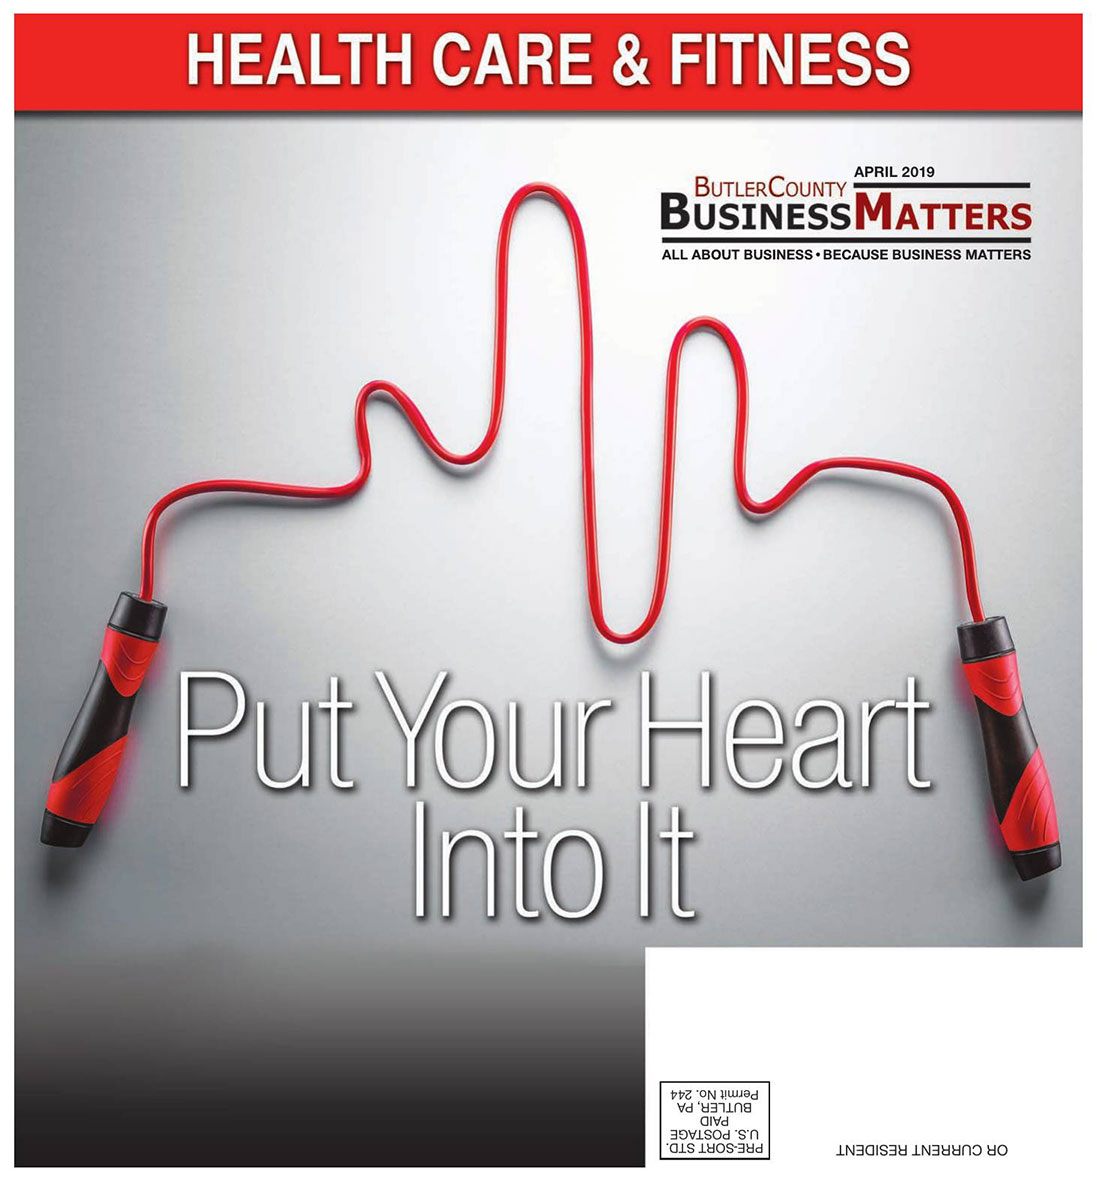 April 2019 - Health Care & Fitness - Put Your Heart Into It